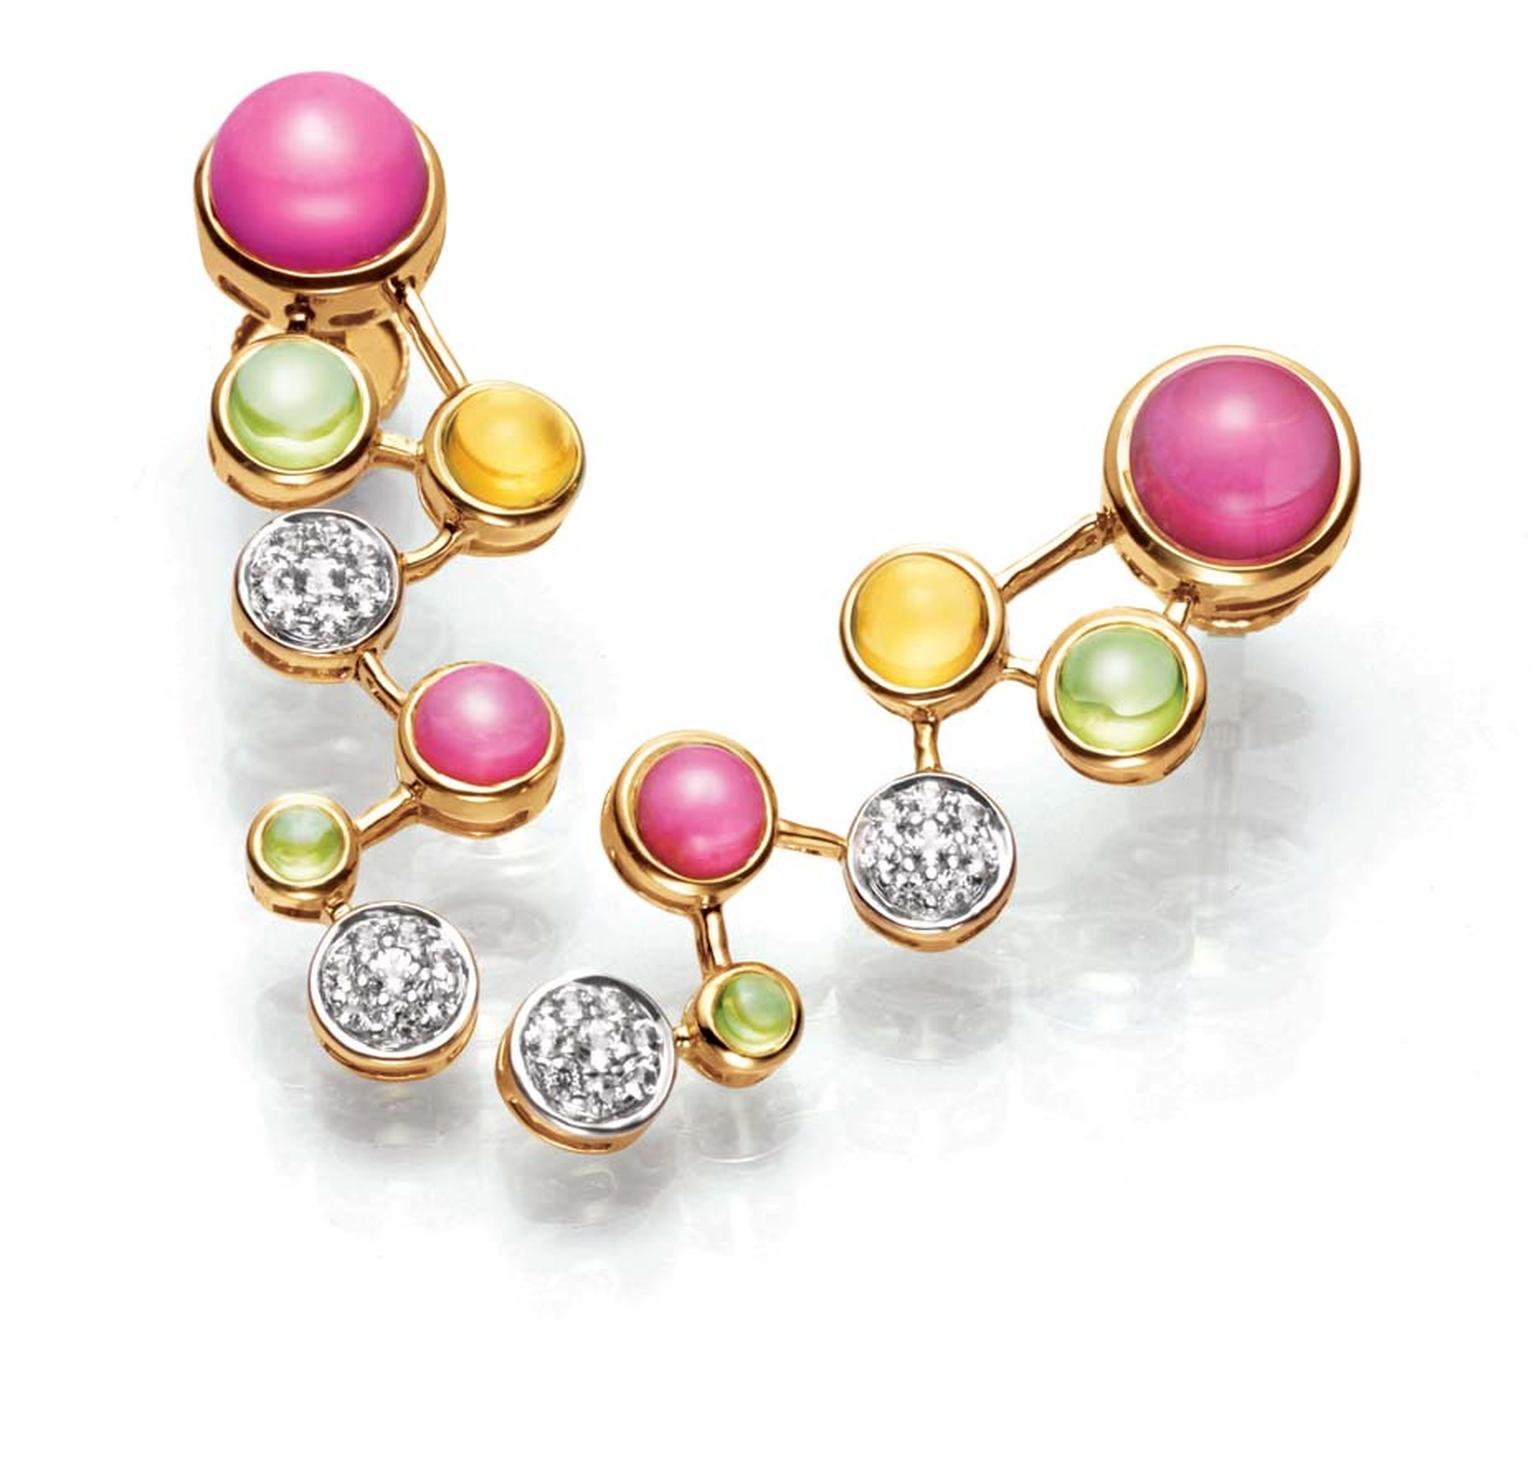 Tanishq IVA 2 collection gold Playful earrings with diamonds and multi-coloured gemstones.